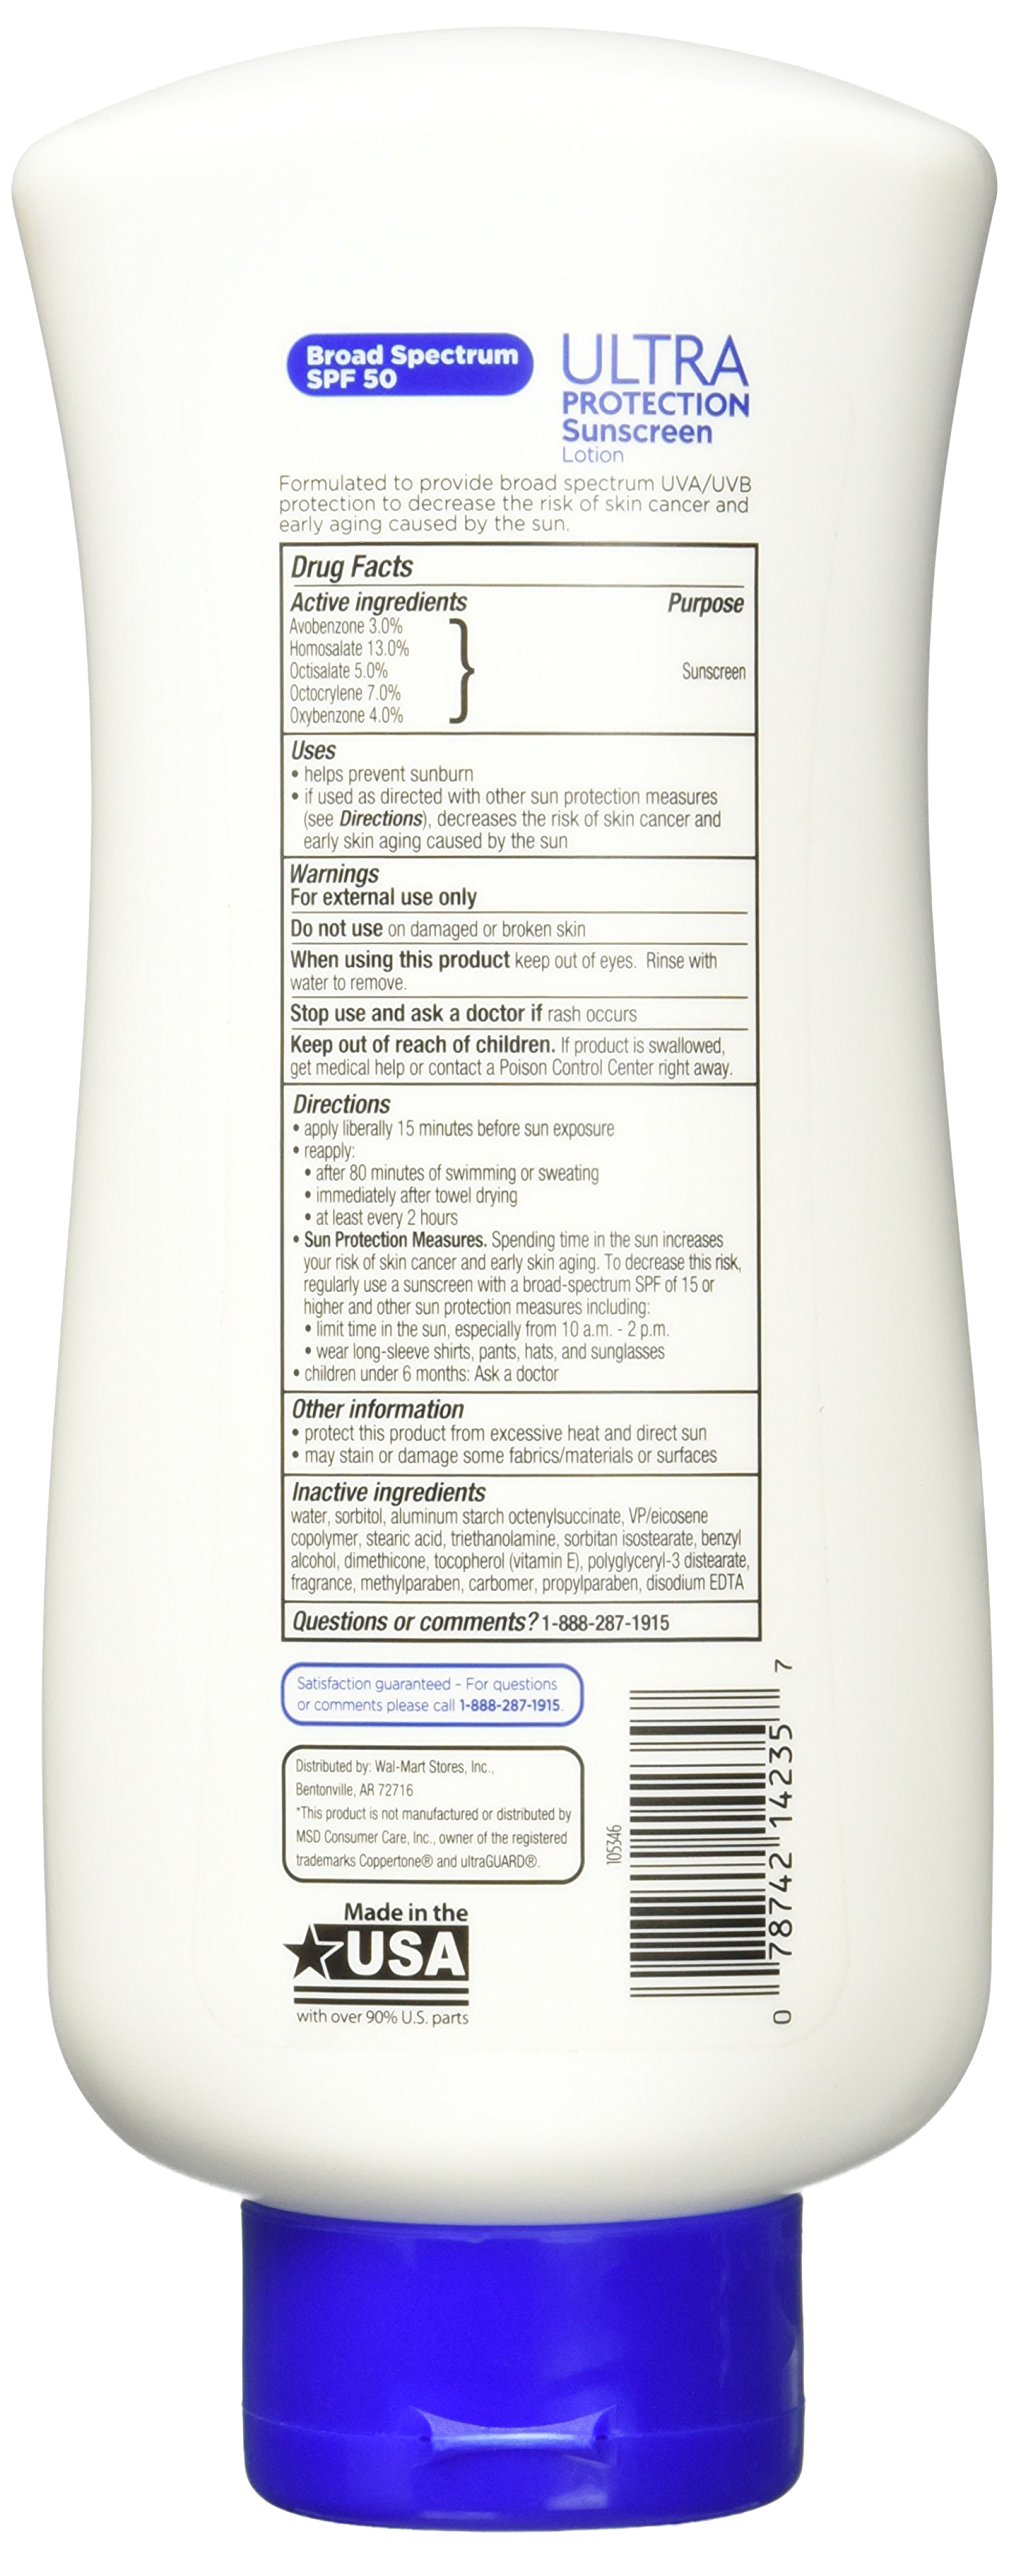 Equate Ultra Protection Sunscreen SPF 50 16oz Compare to Coppertone SPF 50 Lotion